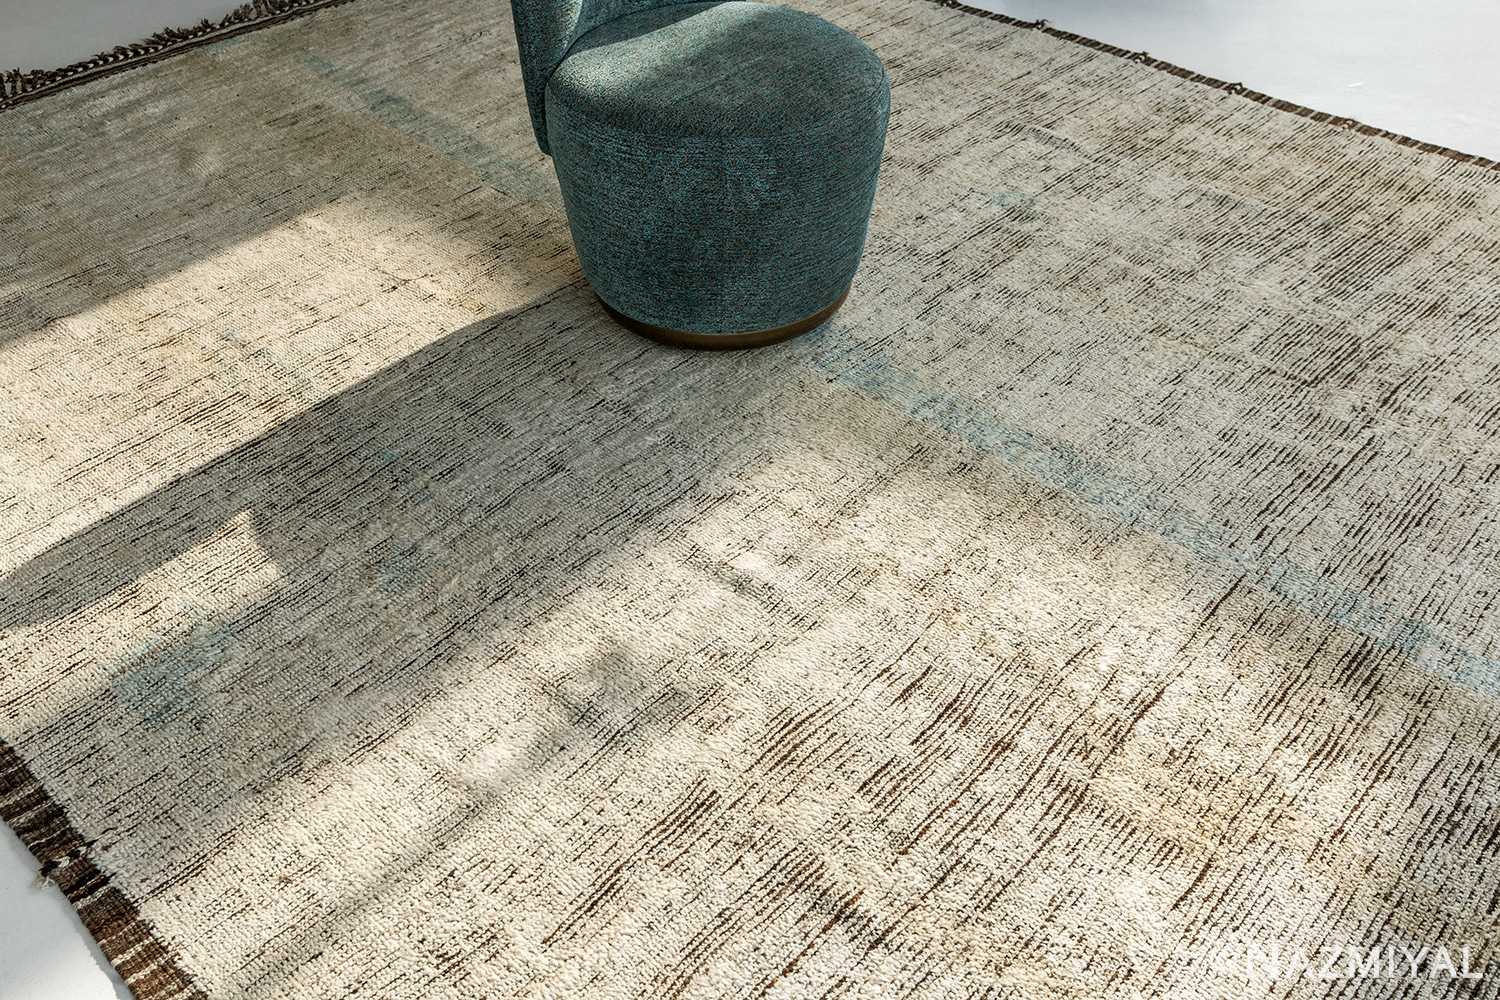 Whole View Of Earth Tones Decorative Modern Distressed Rug 60709 by Nazmiyal Antique Rugs